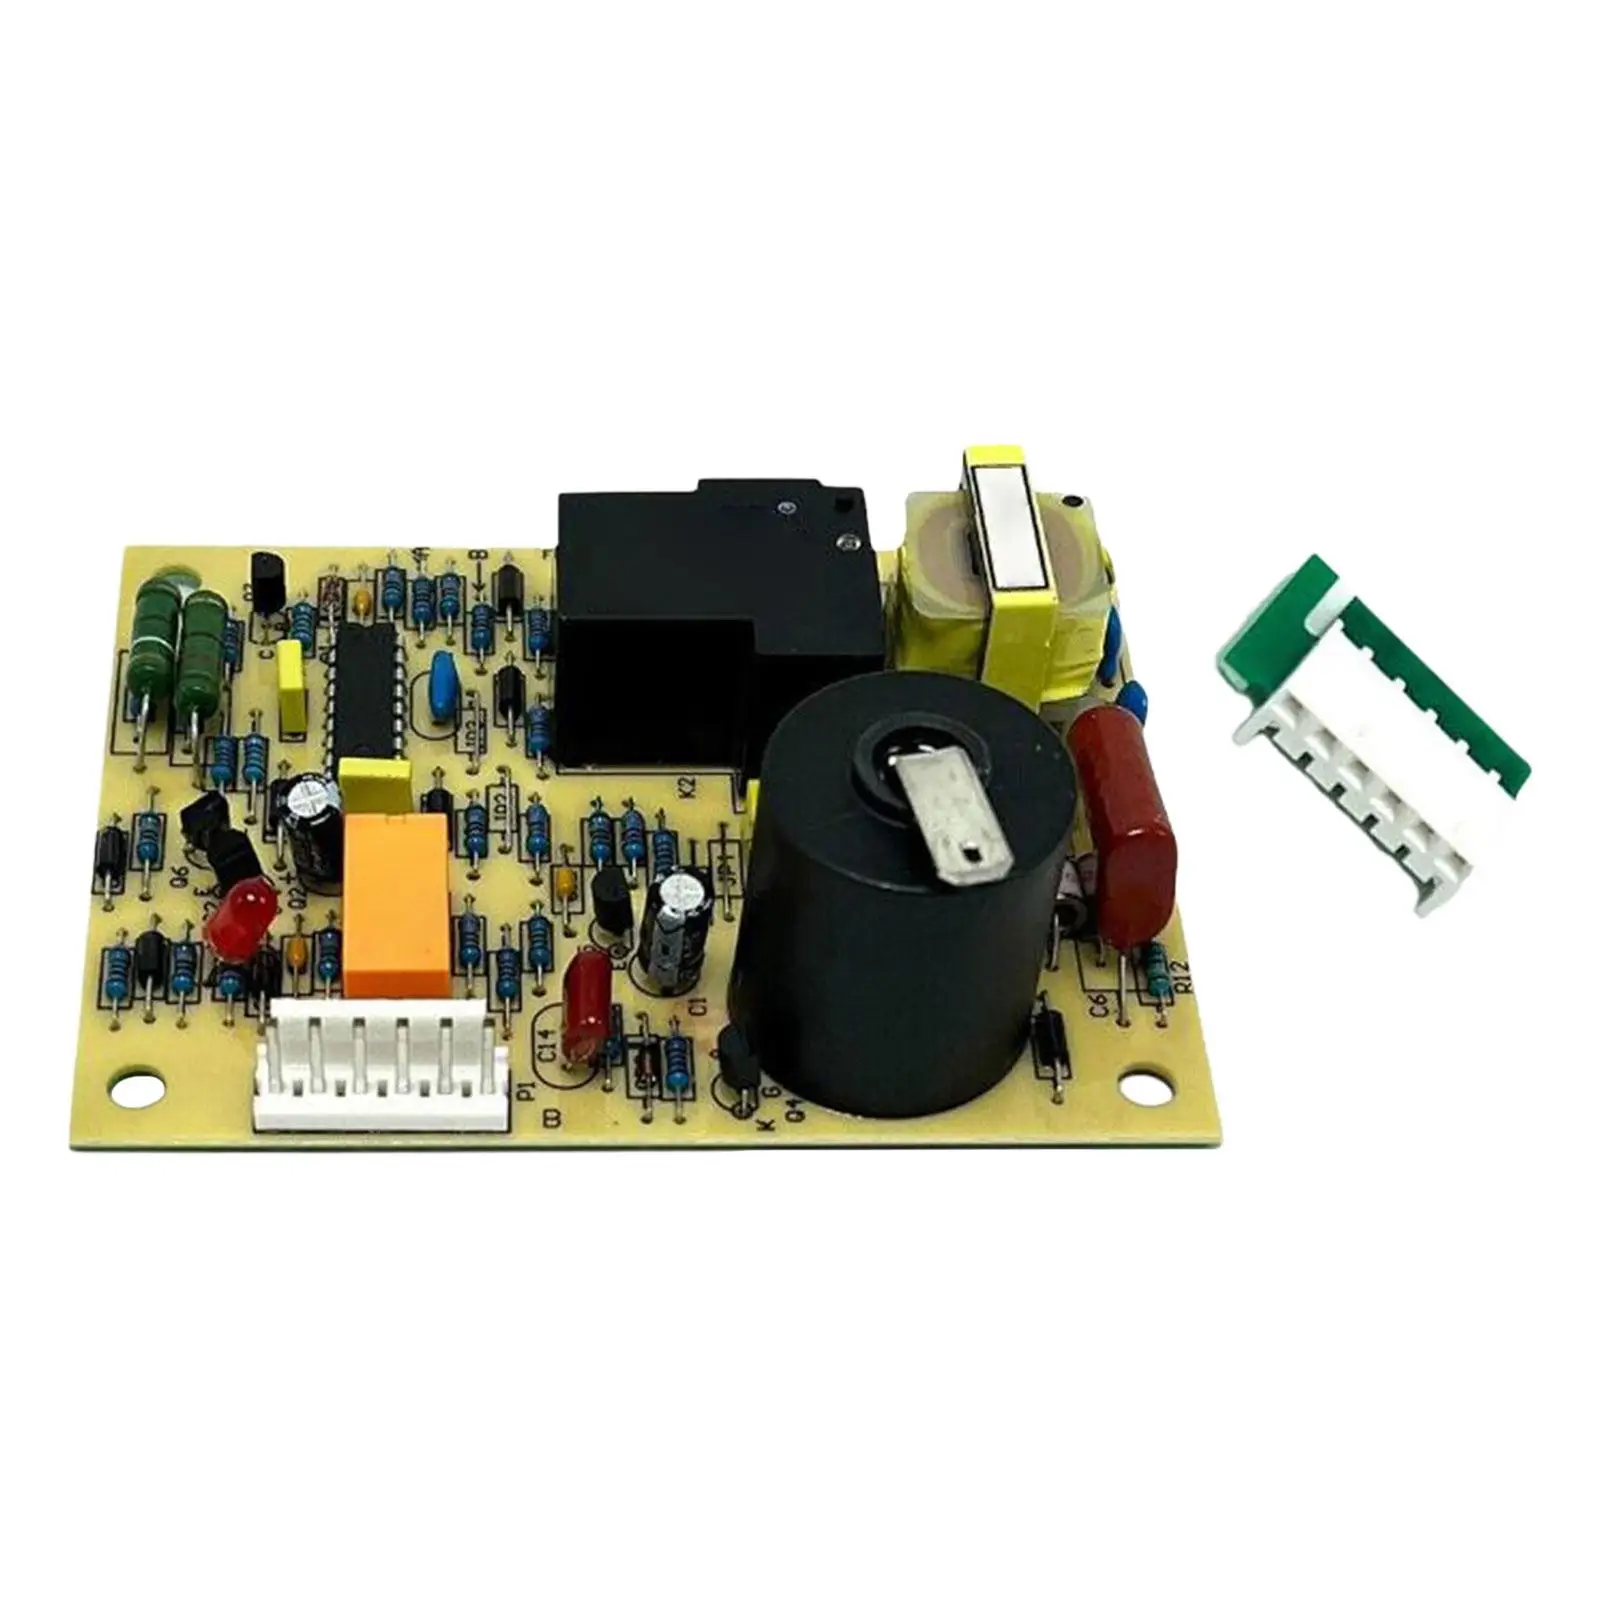 Circuit Board High Performance 31501 for 7912-ii Afmd20 Fa 78 25-32